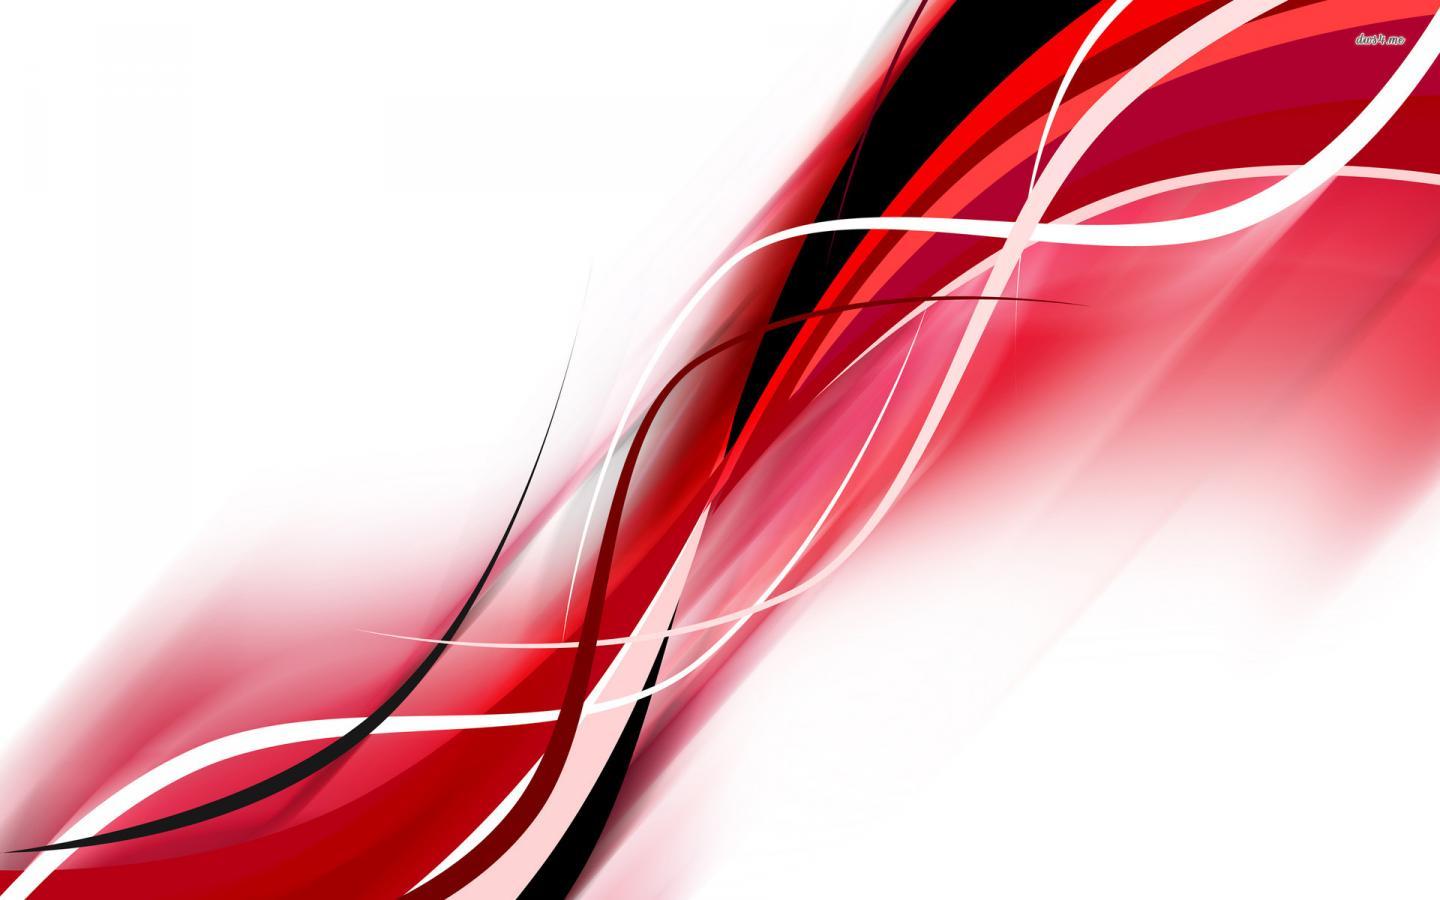 White Red Abstract Wallpapers Hd Backgrounds 8 HD Wallpapers